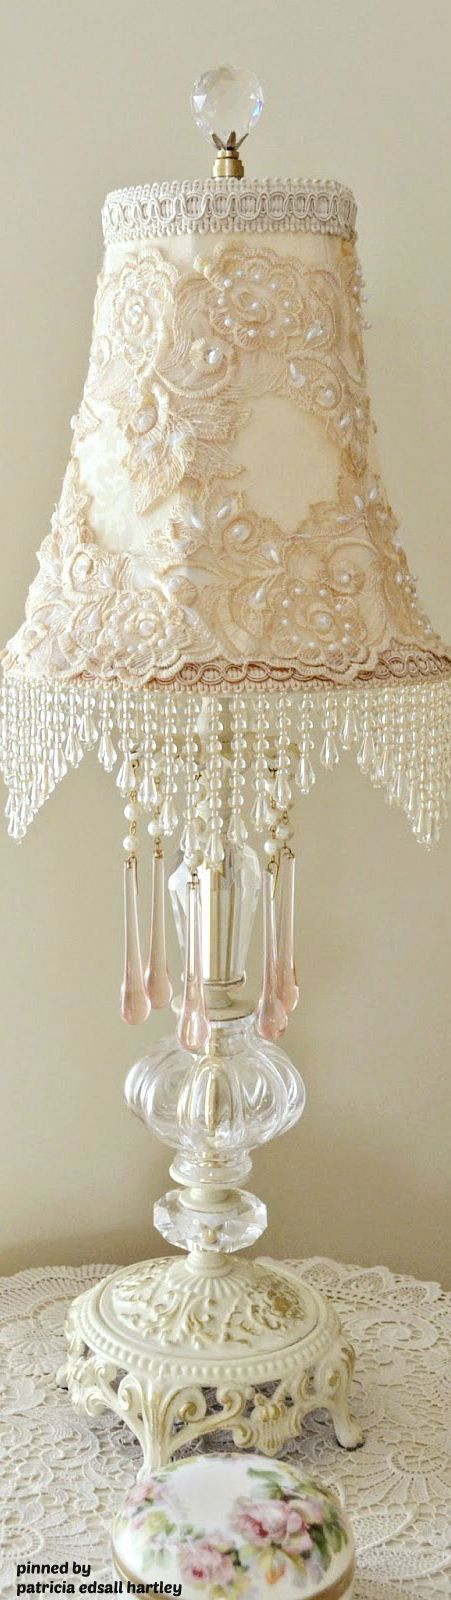 Shabby Chic Bedroom Lamp
 735 best shabby chic lampshades images on Pinterest